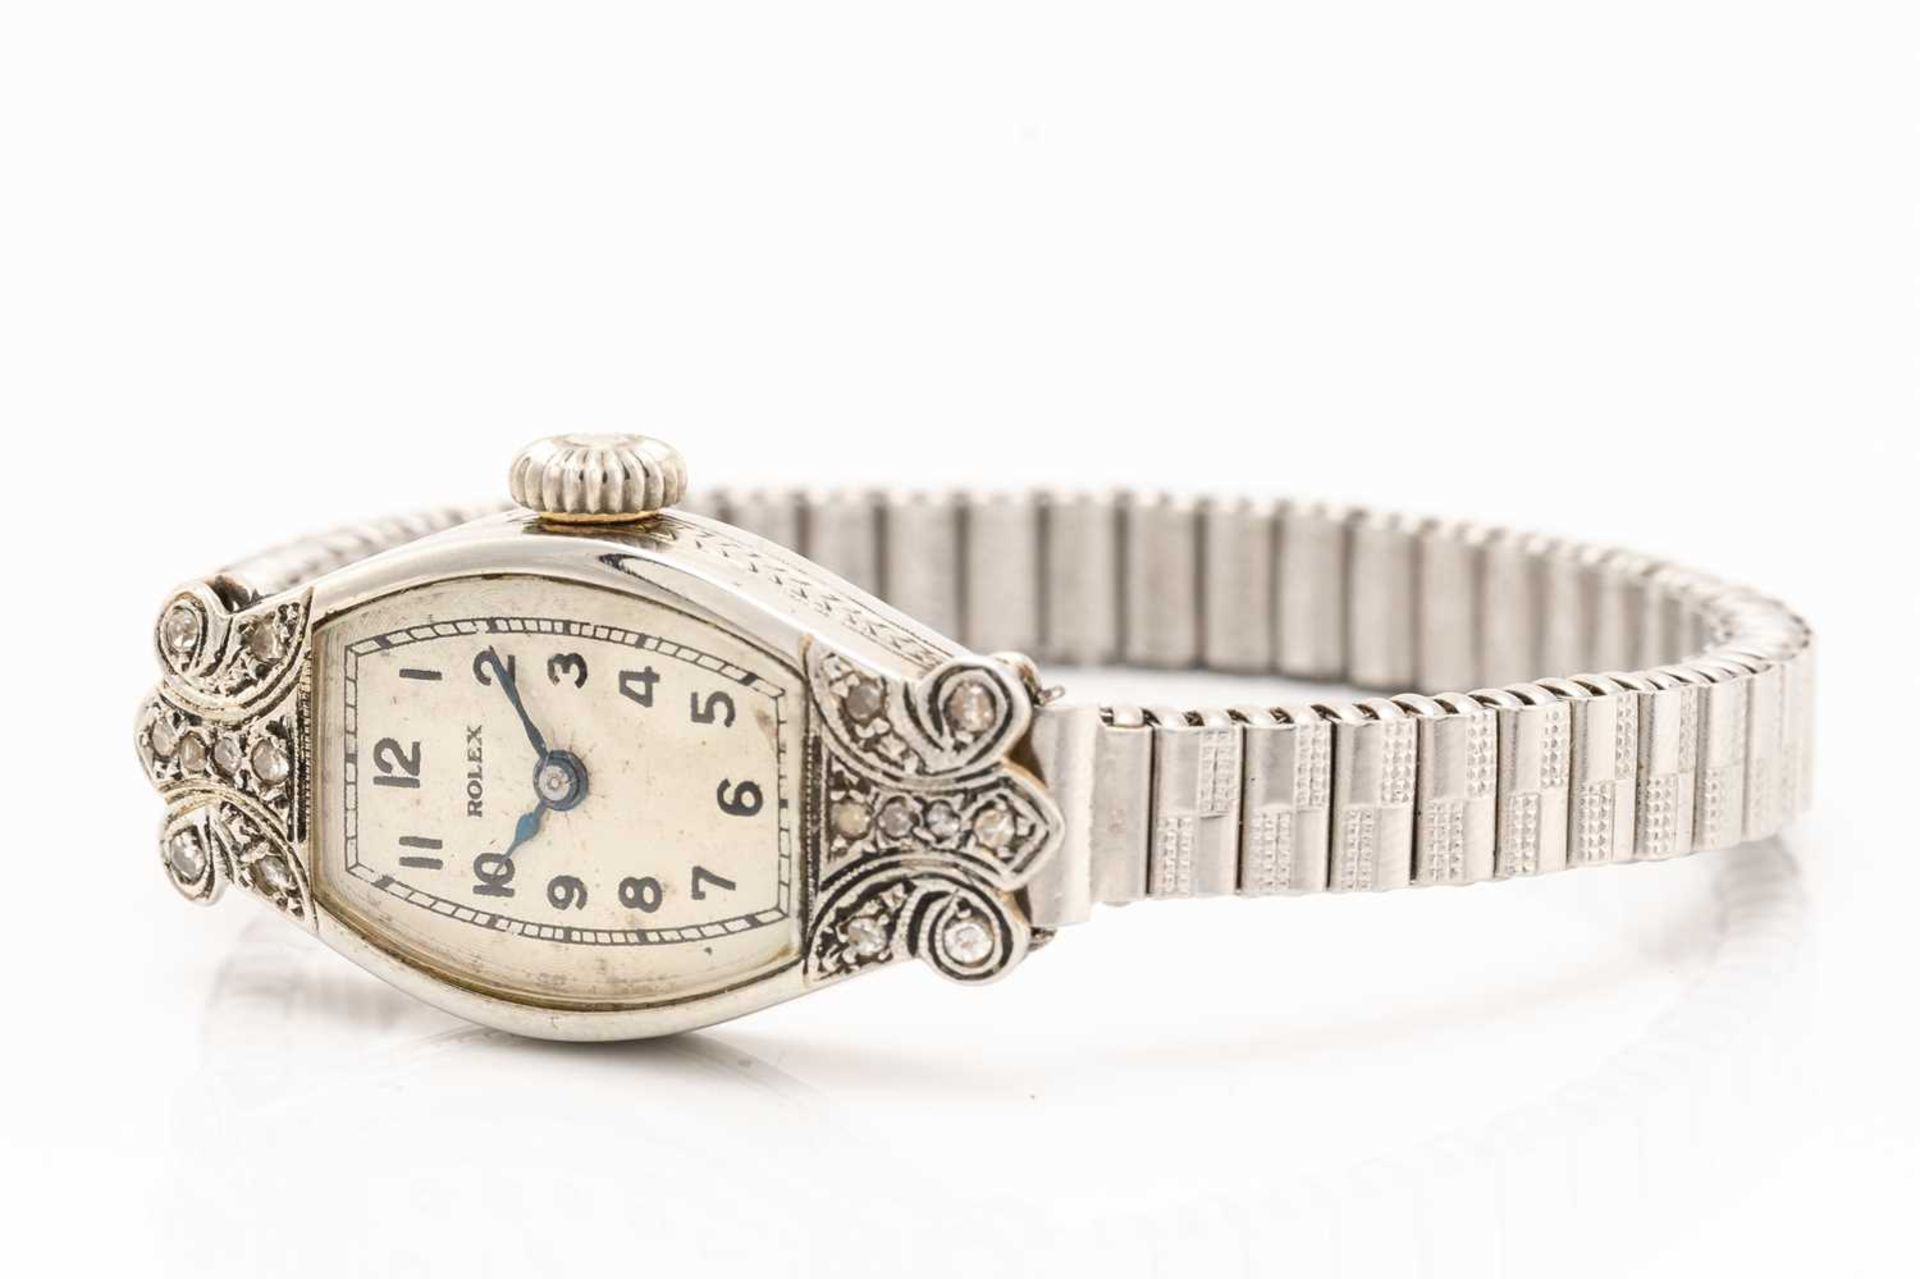 A 1937 Rolex lady's dress watch, featuring a Swiss made hand-wound movement in a white metal tonneau - Image 2 of 5